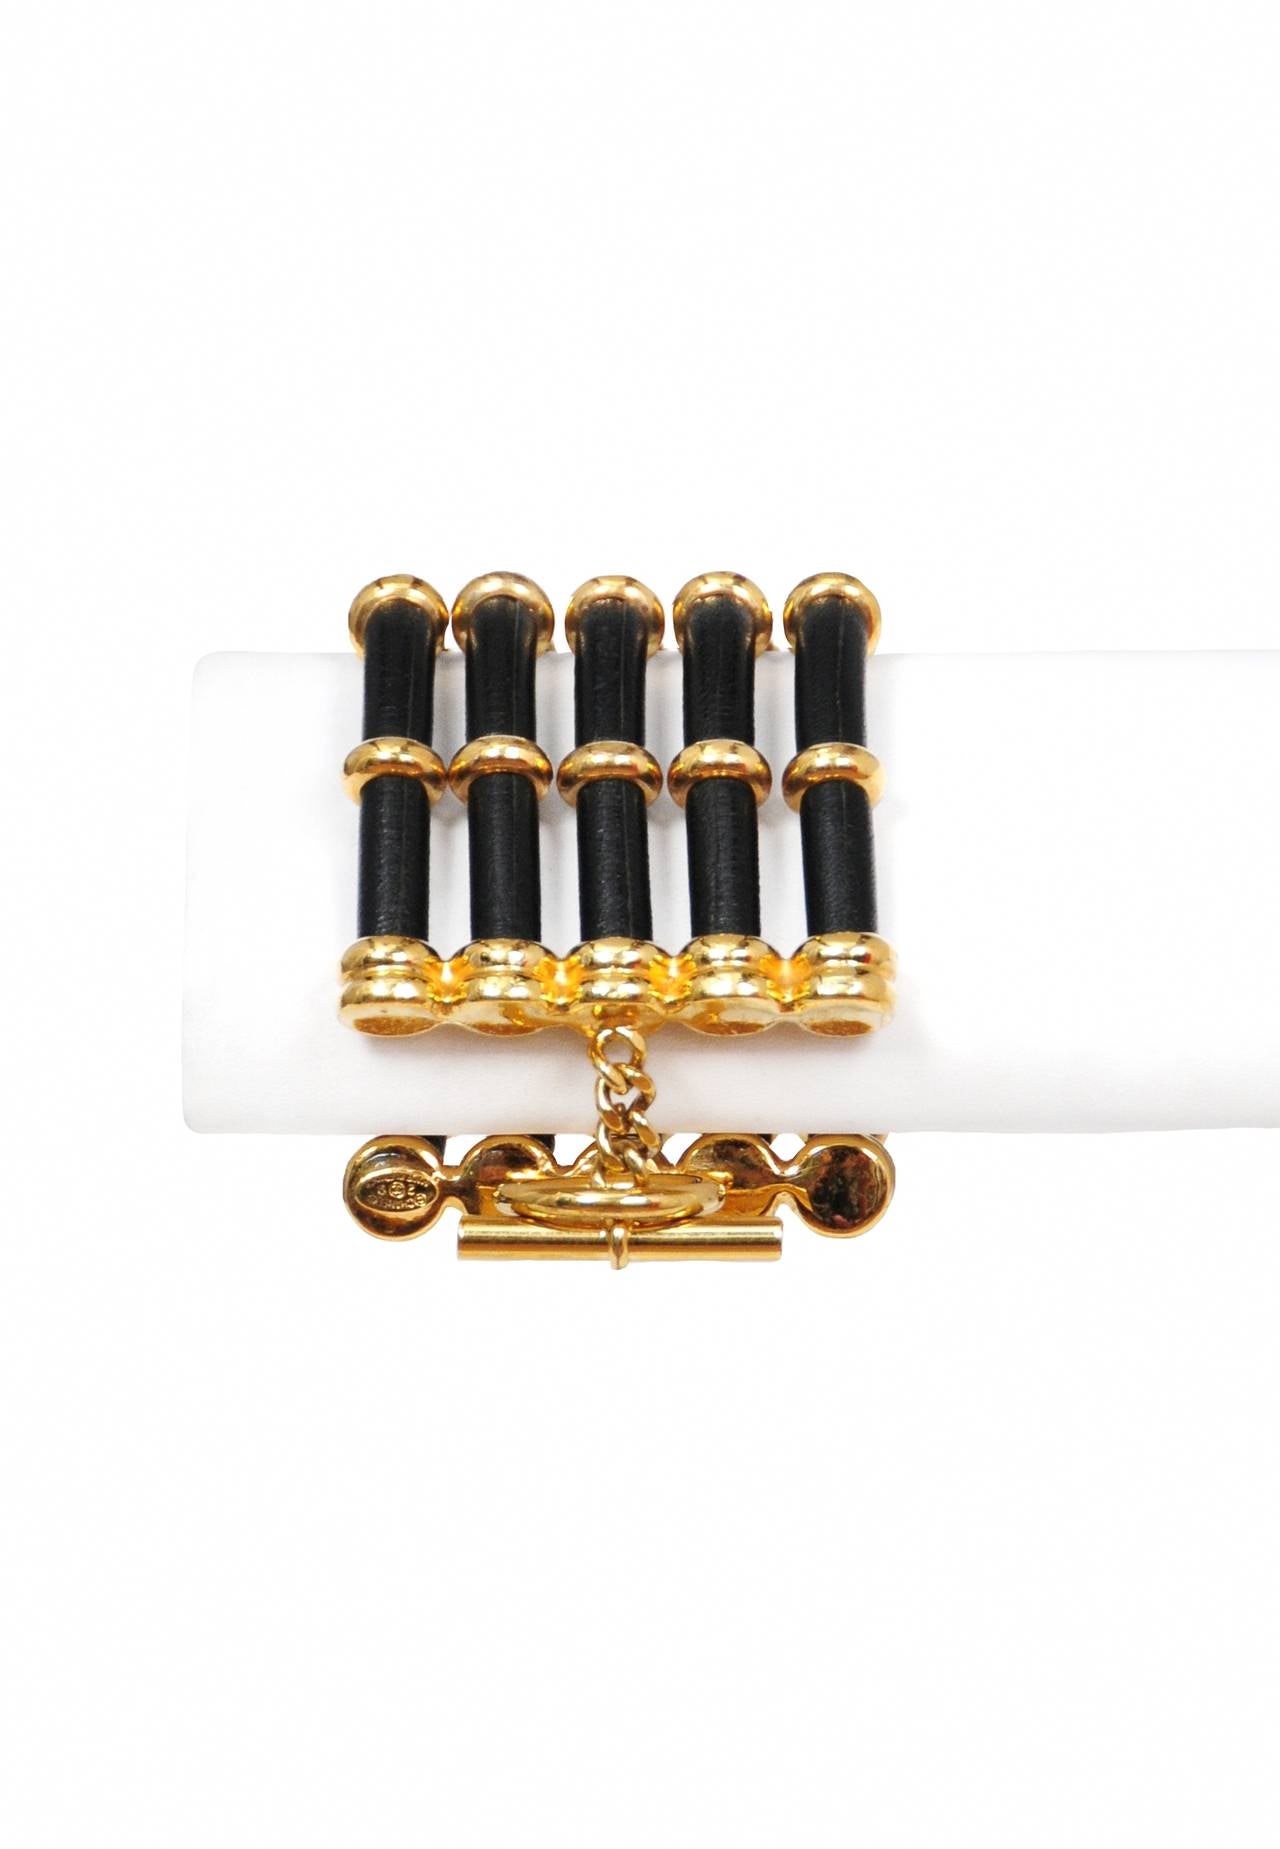 Vintage Chanel bracelet with 5 rows of black leather cording adorned with gold rondelles and finished off with a gold clasp